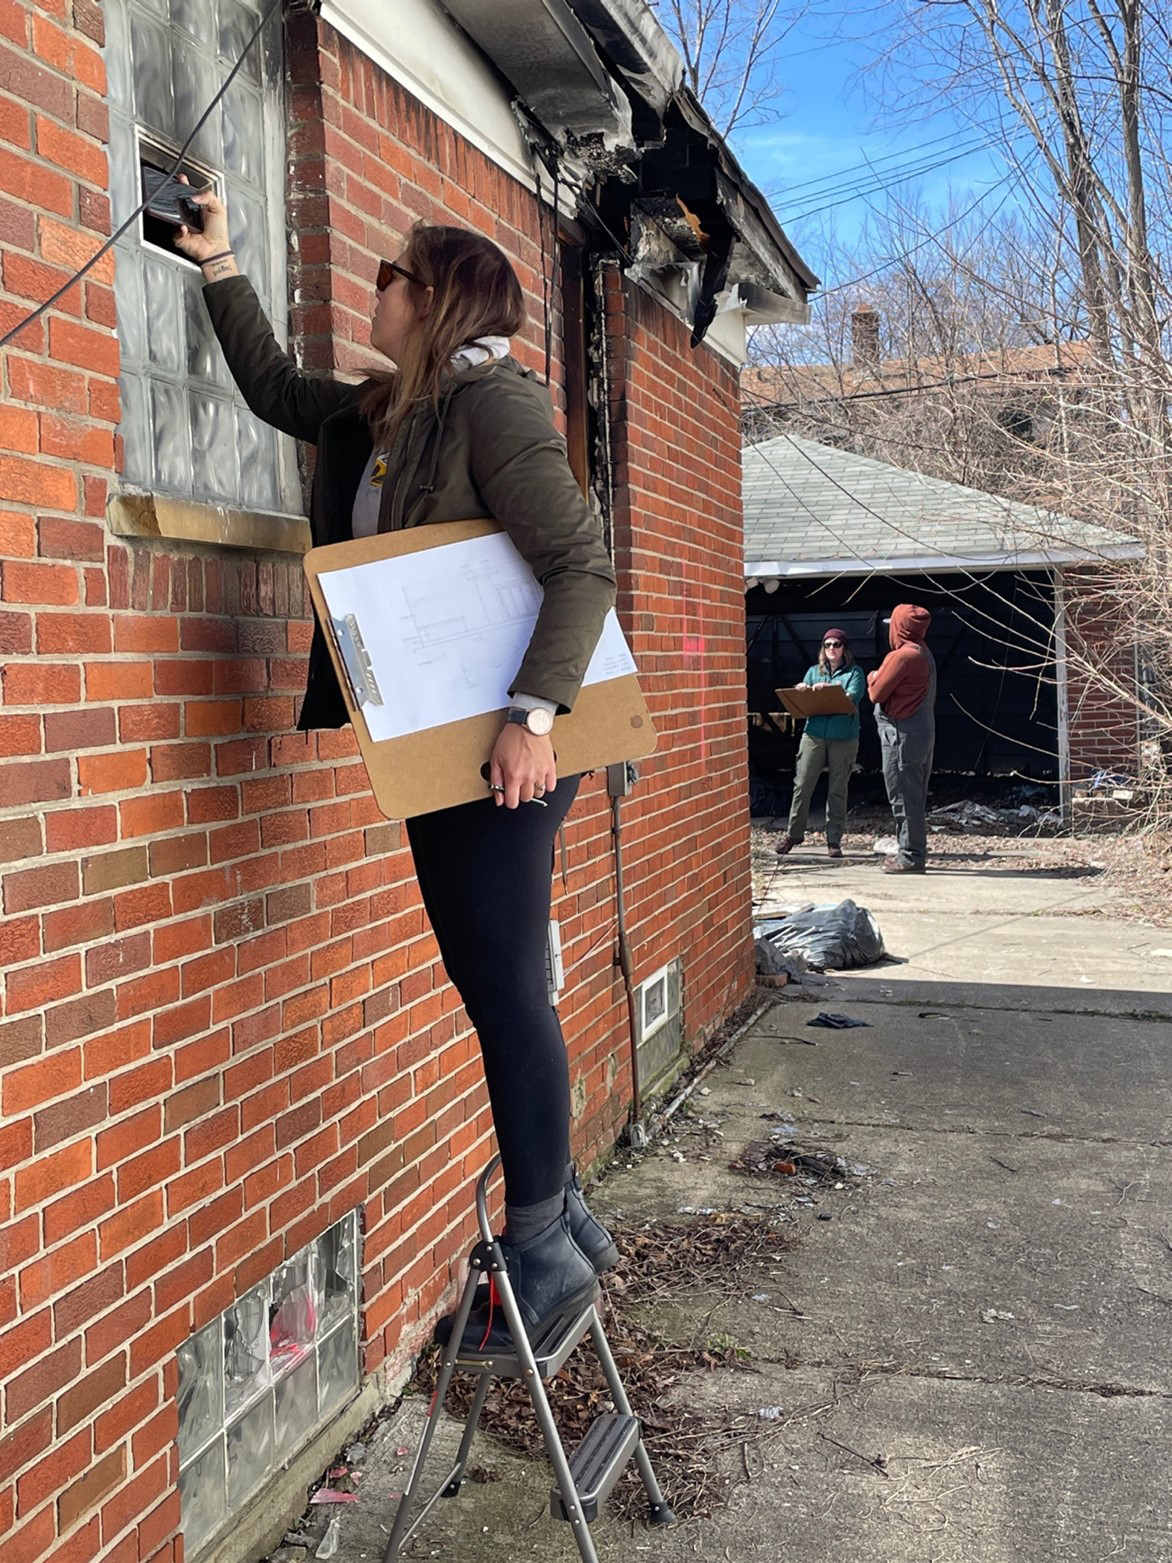 EMU Preservation students Jaclyn Panter, Brooke Boyst, and Taylor Williams record damage to the Malcom X House on Detroit’s east side with photographs and drawings, April 2, 2023 (Dan Bonenberger).